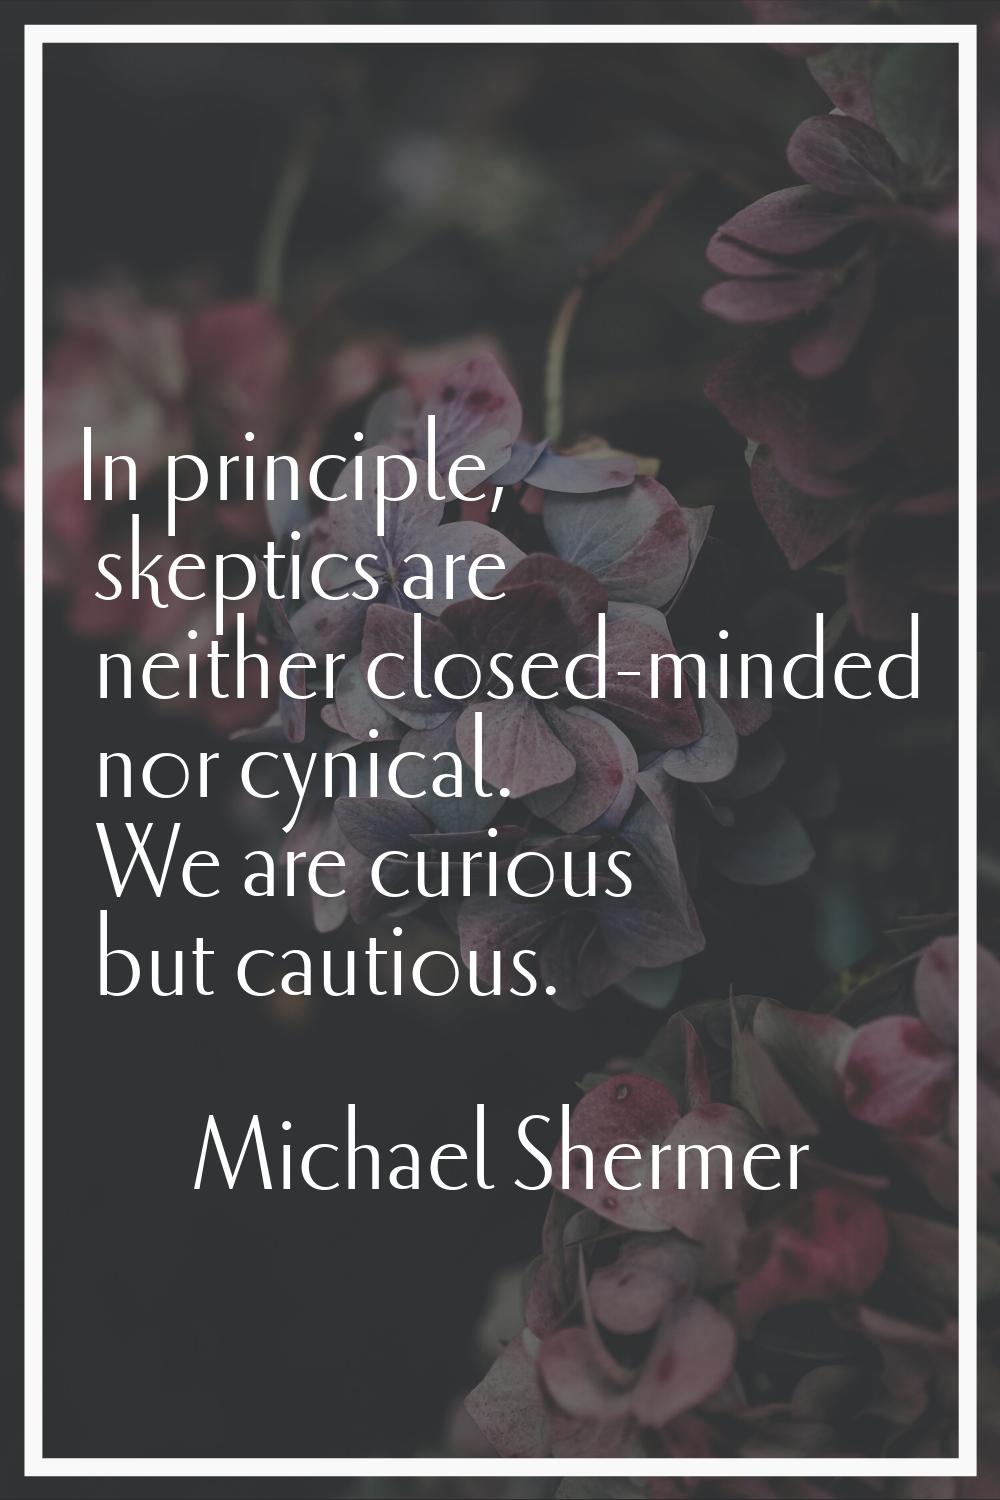 In principle, skeptics are neither closed-minded nor cynical. We are curious but cautious.